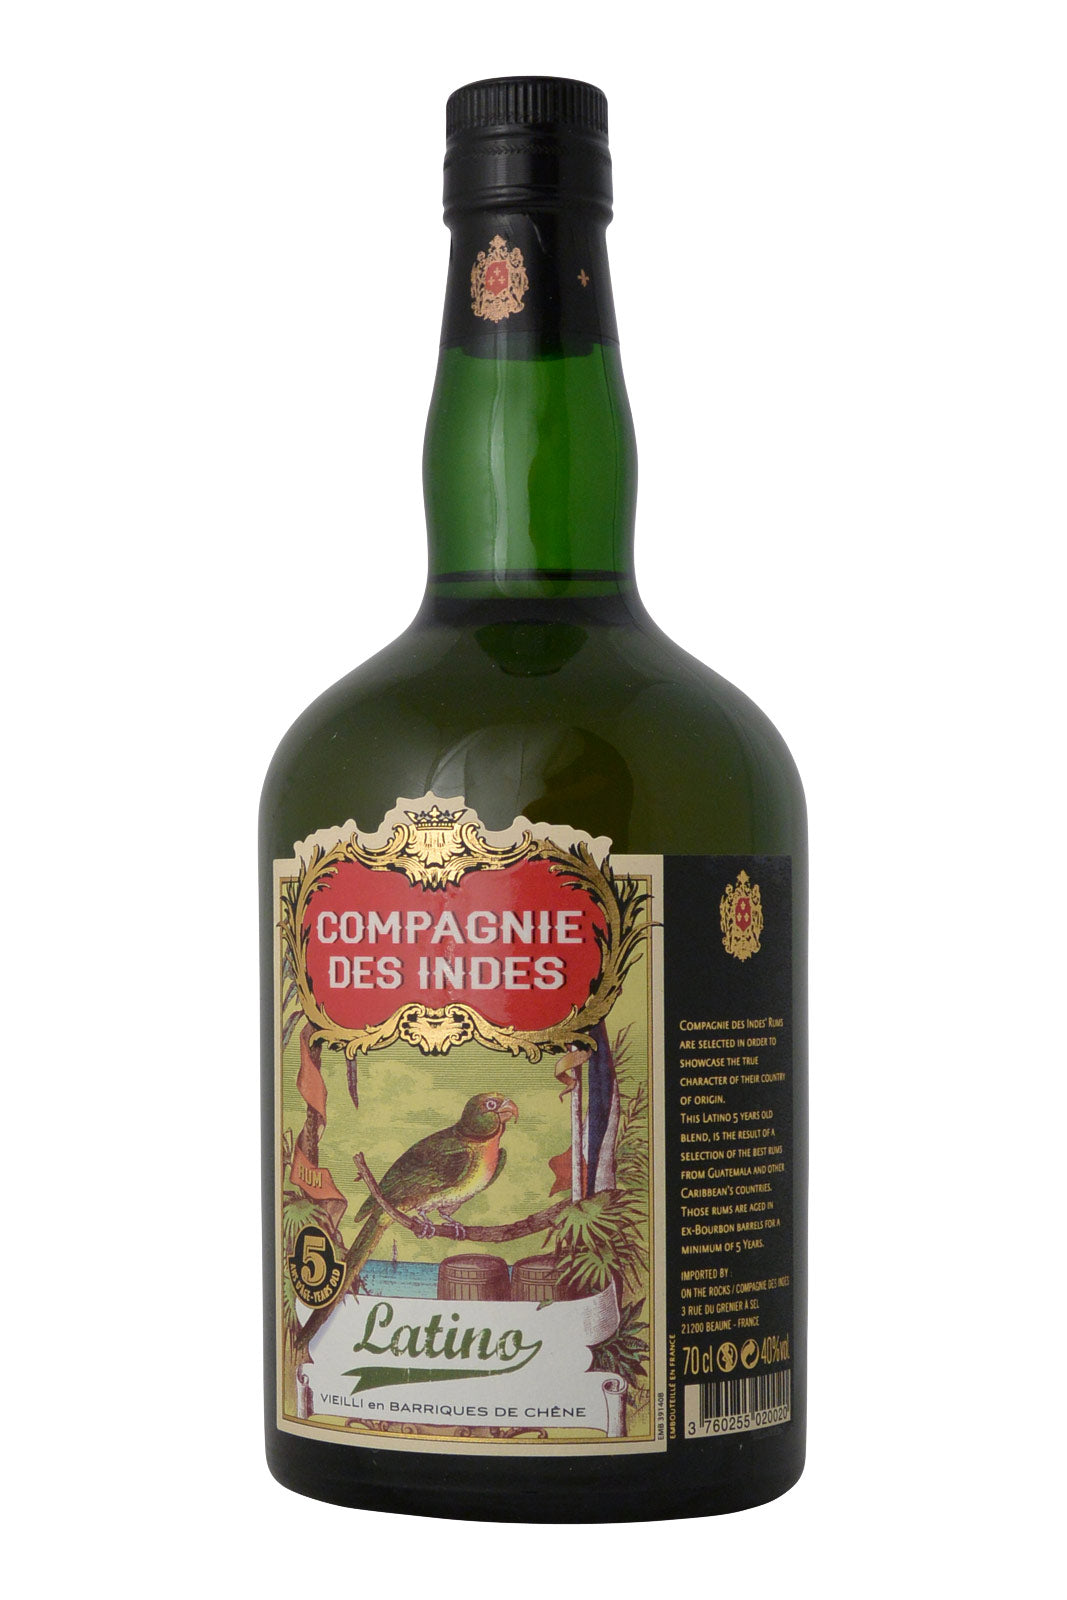 Old des Latino Year Compagnie Indes 5 Blend